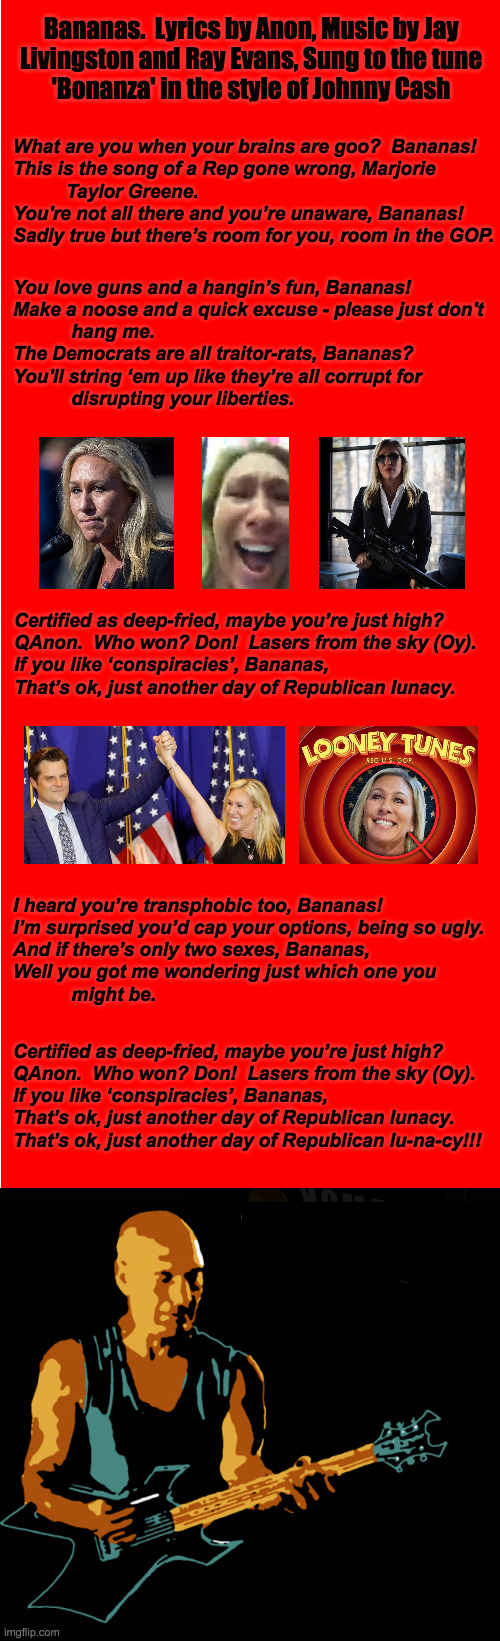 If she goes the Reality TV route, I got her theme song covered  ( : | Bananas.  Lyrics by Anon, Music by Jay
Livingston and Ray Evans, Sung to the tune
'Bonanza' in the style of Johnny Cash; What are you when your brains are goo?  Bananas!
This is the song of a Rep gone wrong, Marjorie
          Taylor Greene.
You're not all there and you’re unaware, Bananas!
Sadly true but there’s room for you, room in the GOP. You love guns and a hangin’s fun, Bananas!
Make a noose and a quick excuse - please just don't
           hang me.
The Democrats are all traitor-rats, Bananas?
You'll string ‘em up like they’re all corrupt for
           disrupting your liberties. Certified as deep-fried, maybe you’re just high?
QAnon.  Who won? Don!  Lasers from the sky (Oy).
If you like ‘conspiracies’, Bananas,
That’s ok, just another day of Republican lunacy. I heard you’re transphobic too, Bananas!
I’m surprised you’d cap your options, being so ugly.
And if there’s only two sexes, Bananas,
Well you got me wondering just which one you
           might be. Certified as deep-fried, maybe you’re just high?
QAnon.  Who won? Don!  Lasers from the sky (Oy).
If you like ‘conspiracies’, Bananas,
That’s ok, just another day of Republican lunacy.
That’s ok, just another day of Republican lu-na-cy!!! | image tagged in memes,marjorie taylor greene,bananas,republican lunacy,i'm not johnny cash,but the live version rocks | made w/ Imgflip meme maker